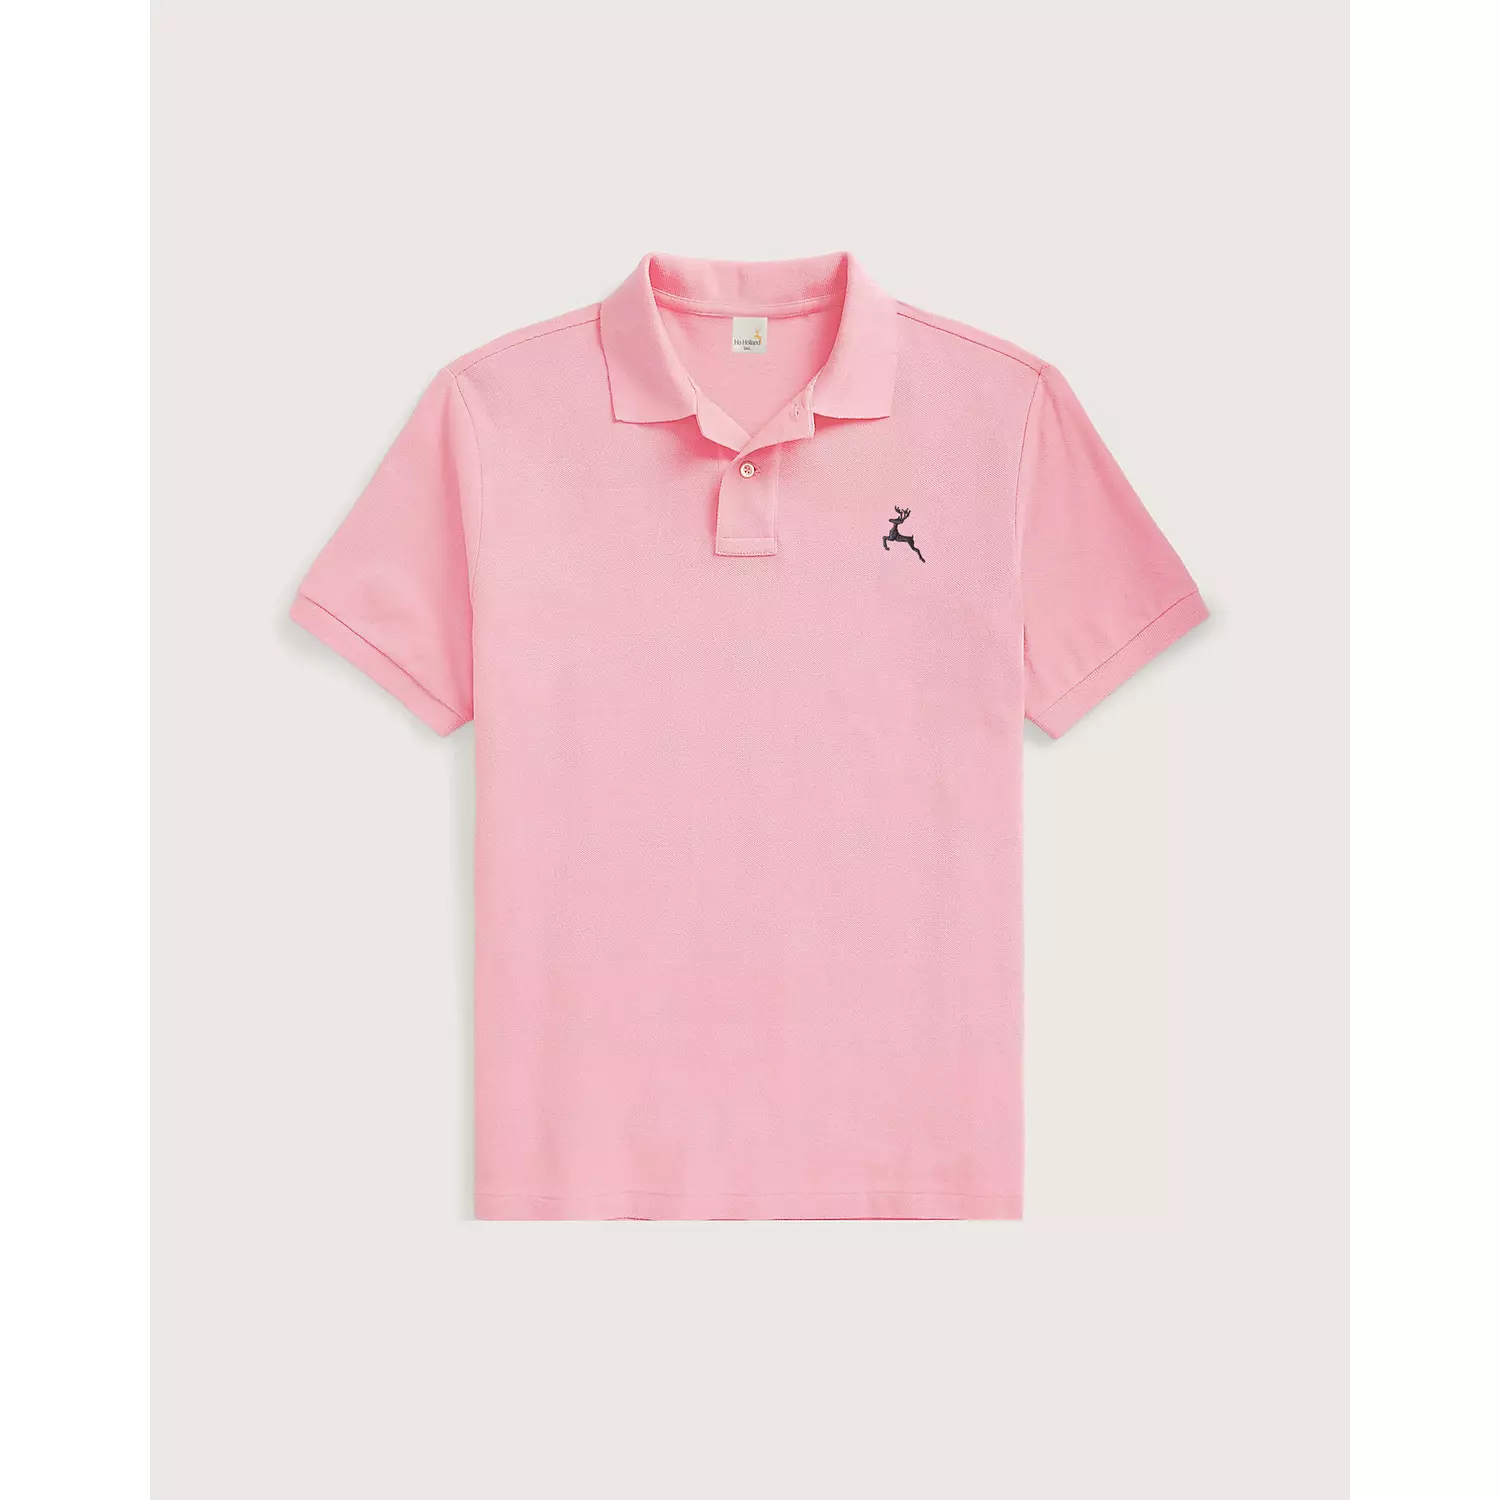 Polo T shirt - Pink hover image